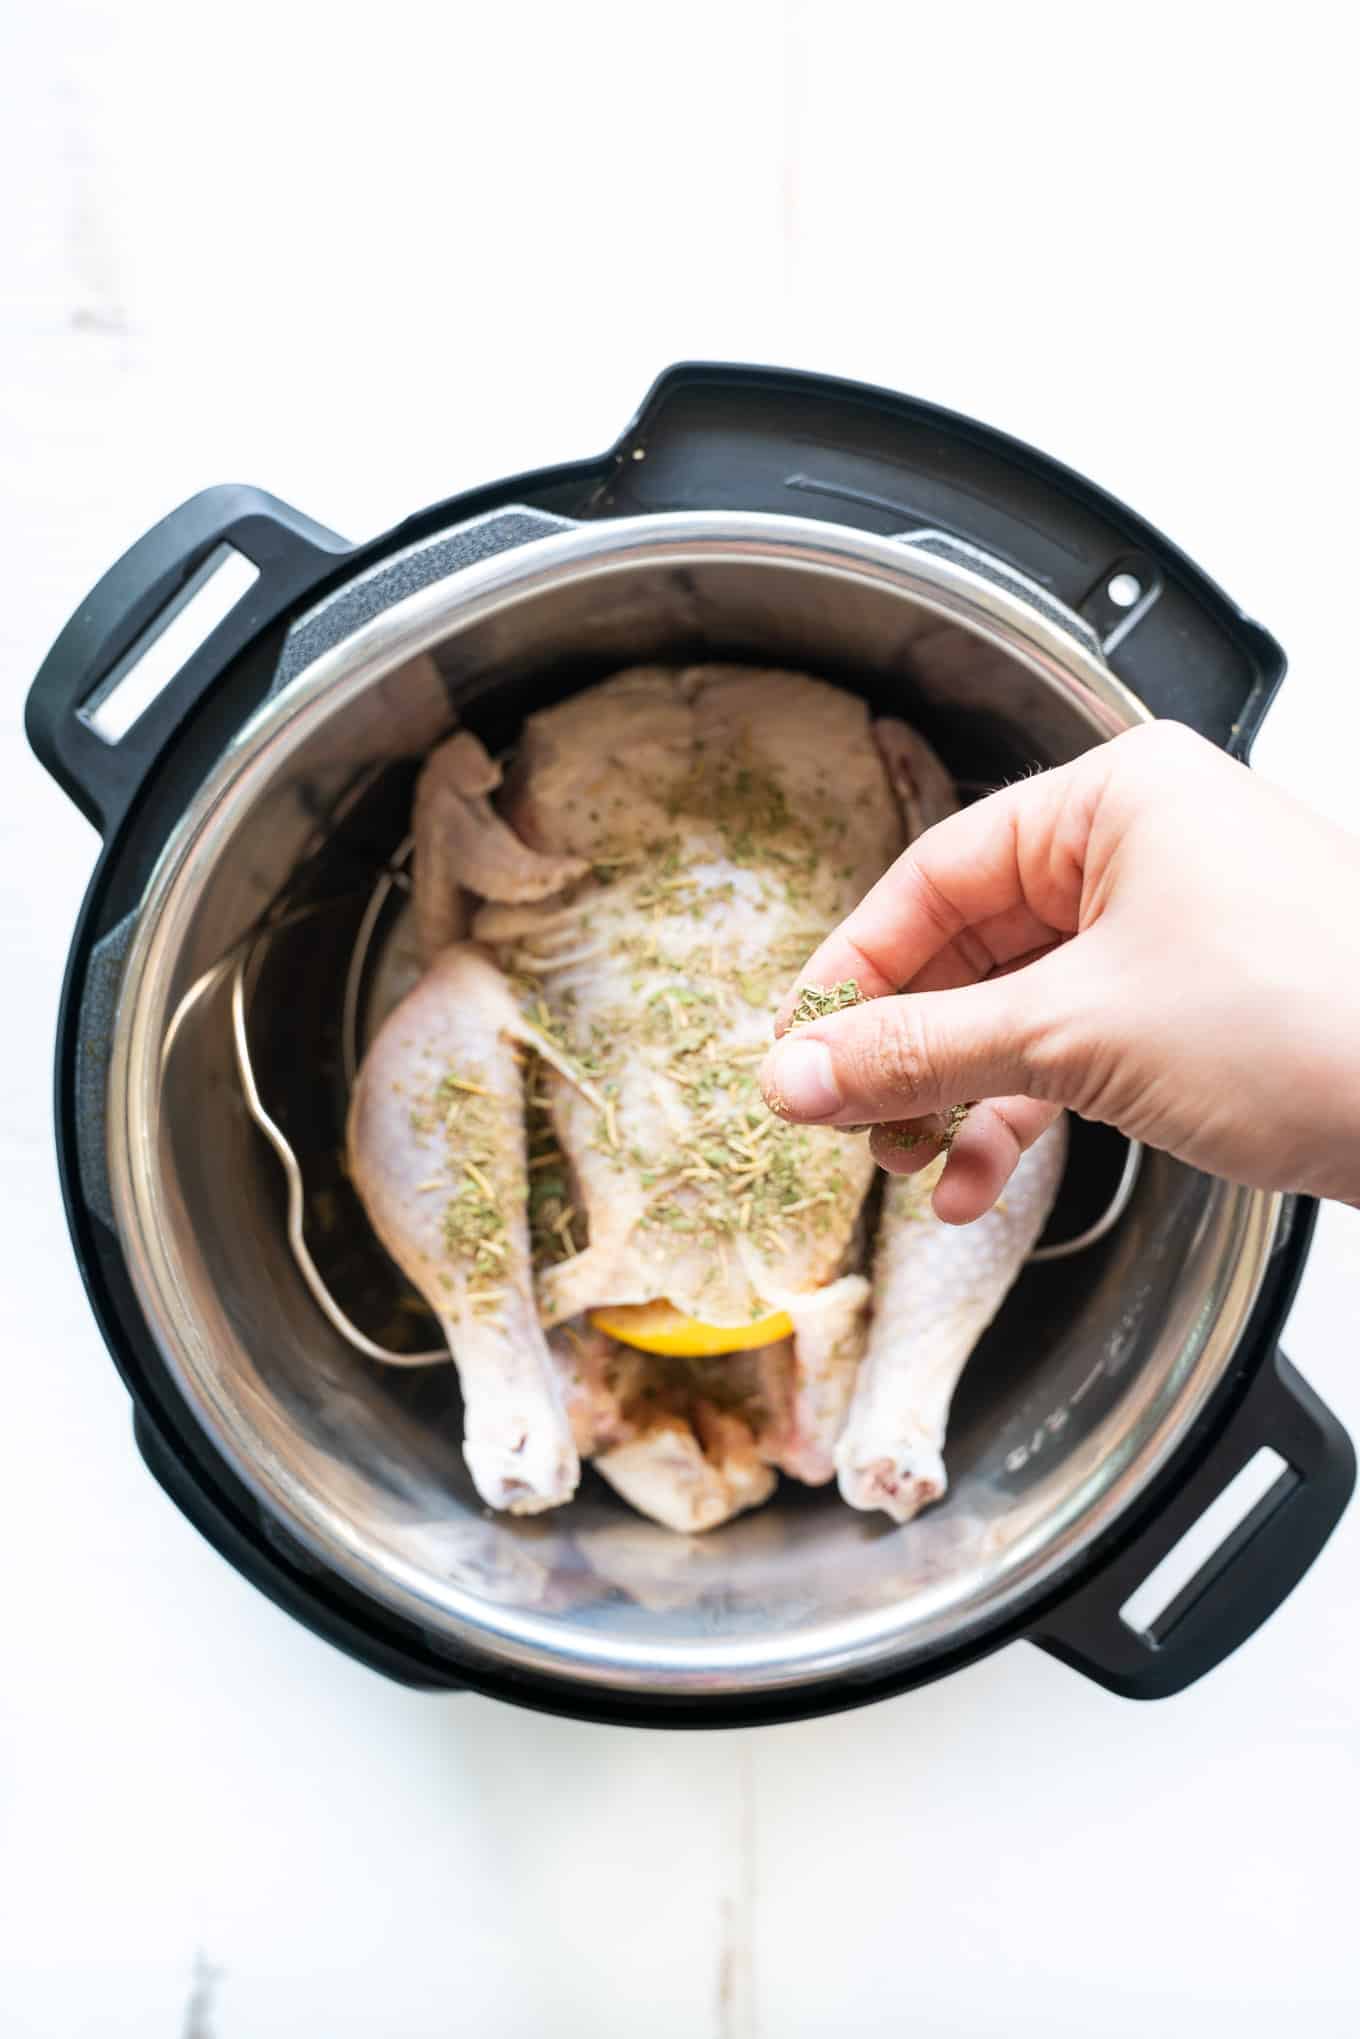 Instant Pot Whole Chicken being seasoned with spice mix